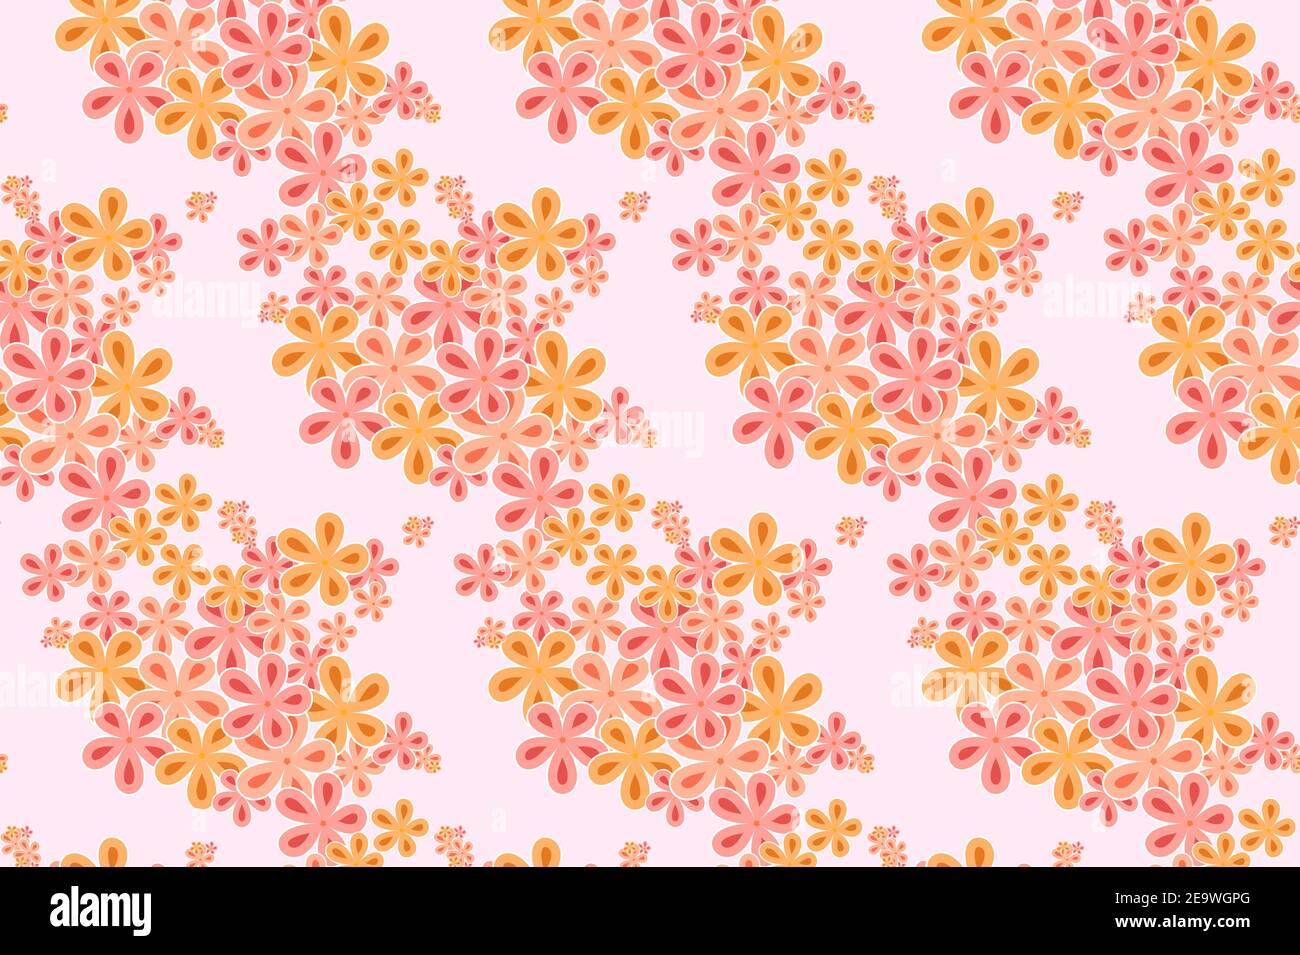 Delicate Pastel Floral Pattern Light Pink And Orange Flowers